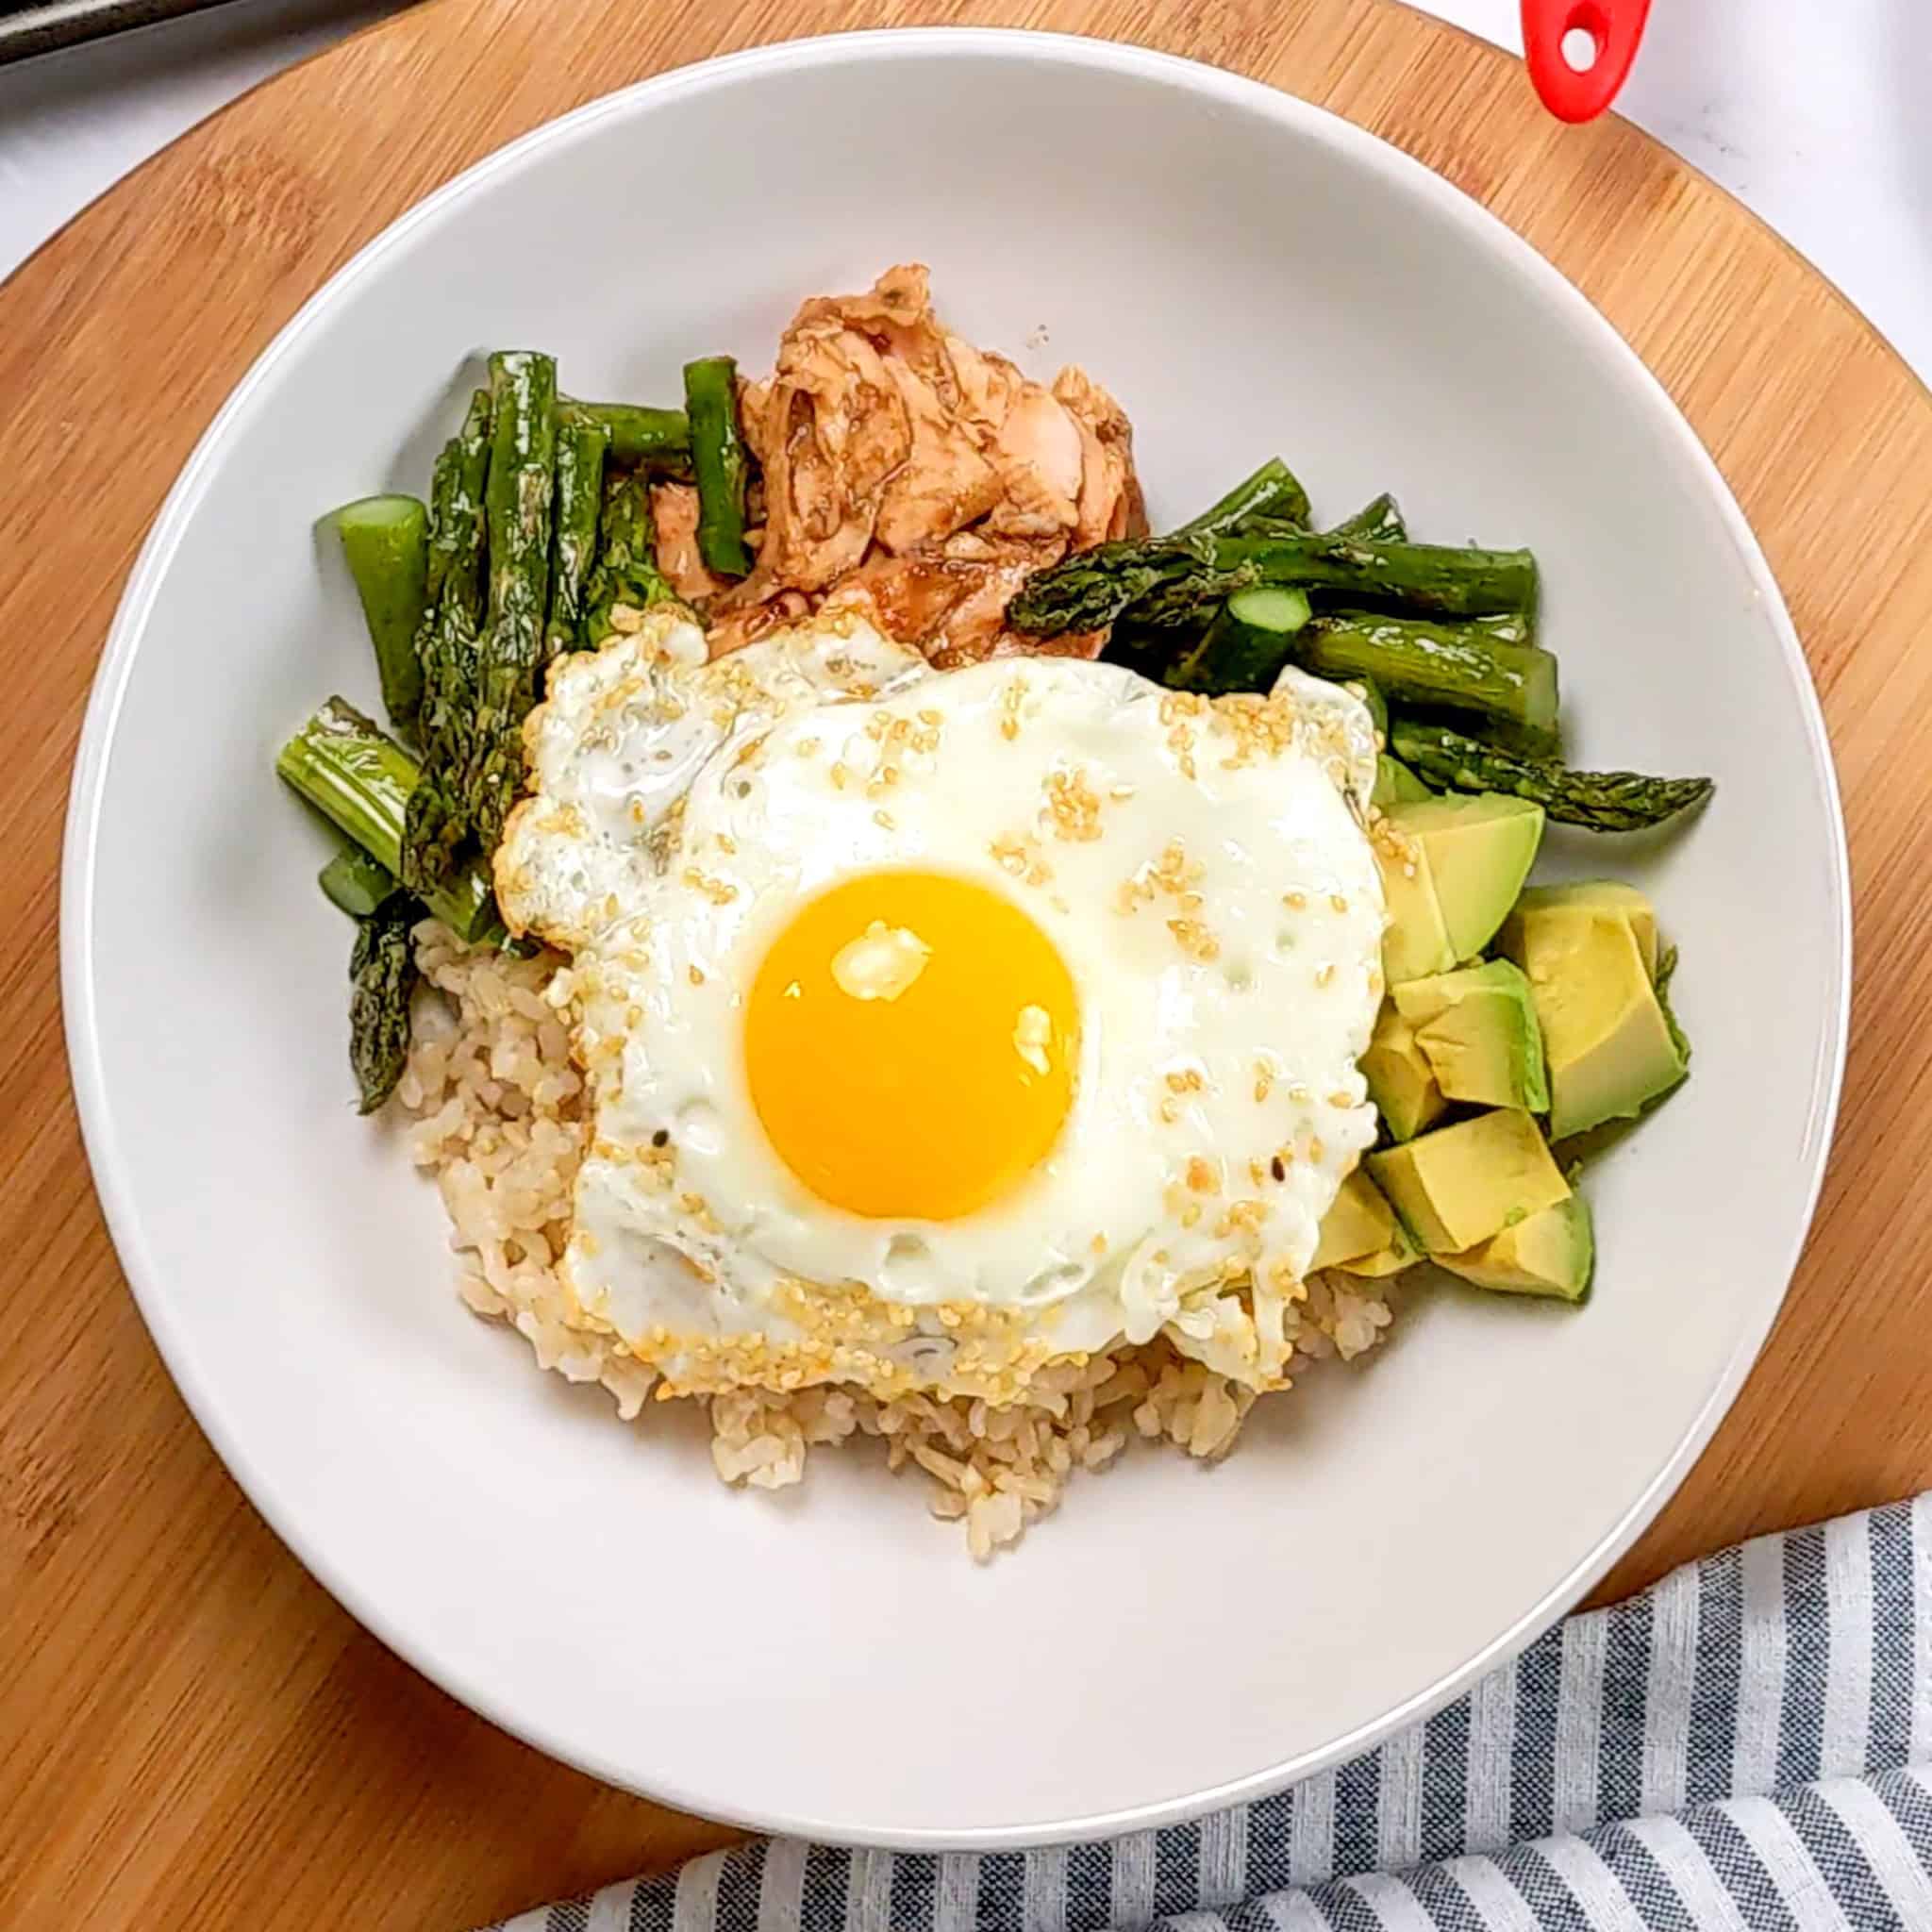 flaked miso salmon, asparagus, avocado chunks and brown rice assembled in a wide rim bowl with an egg on top.